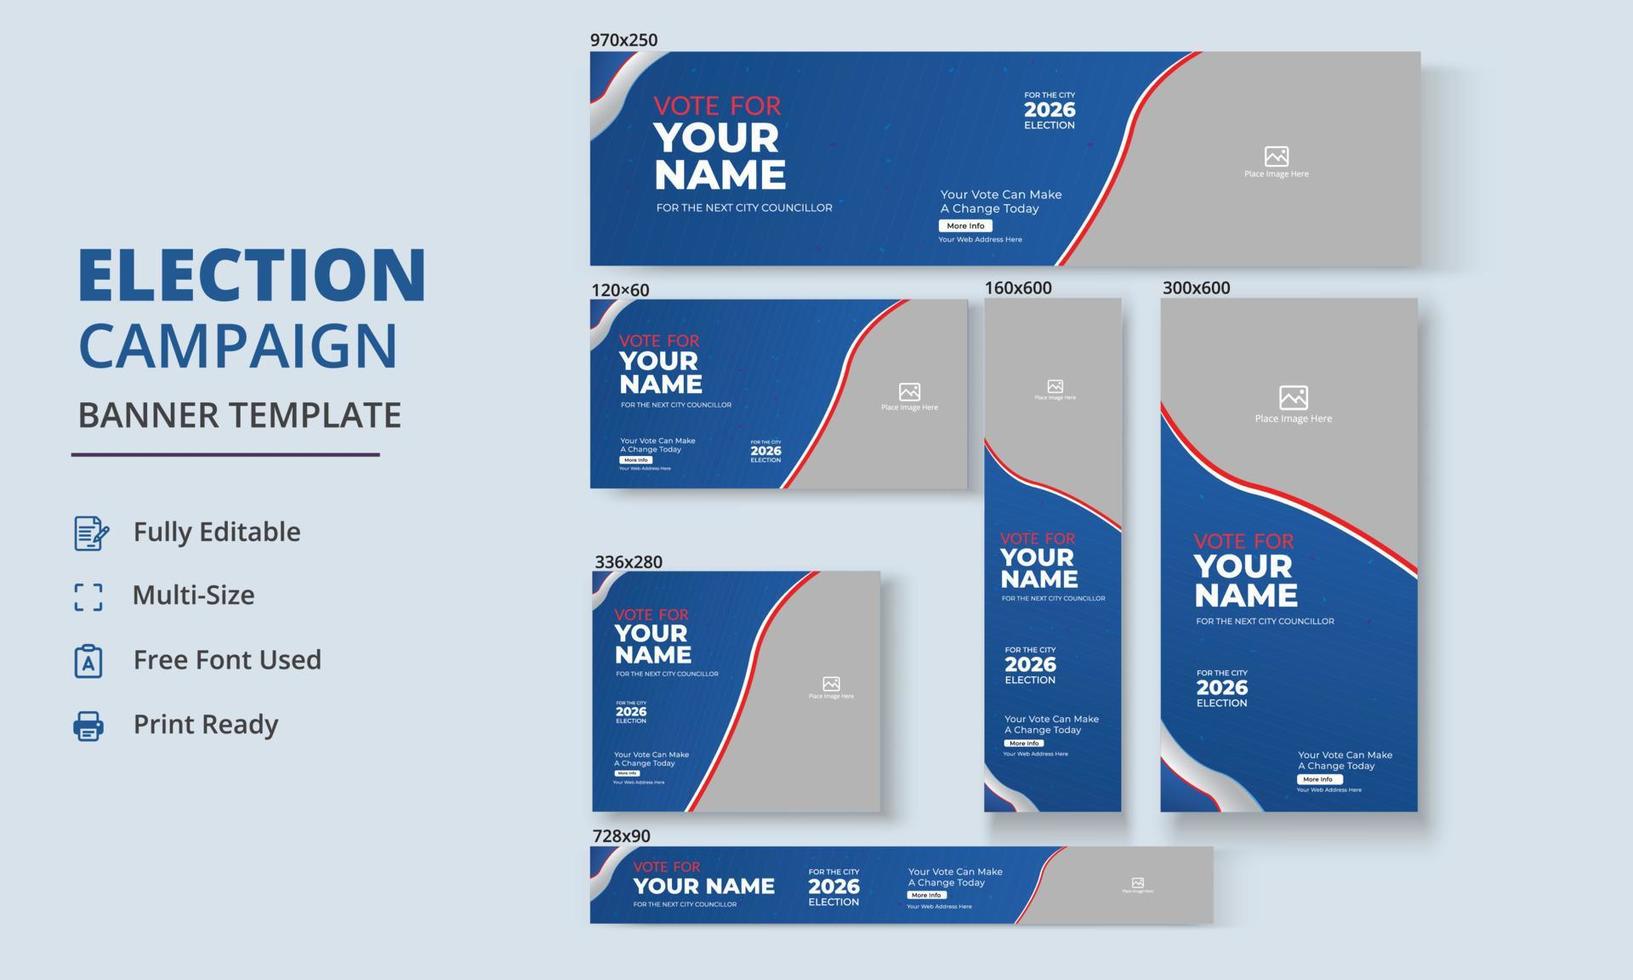 Election Campaign Banner Template, Political Campaign Banner Template, Vote Banner Template, Political Election Poster vector